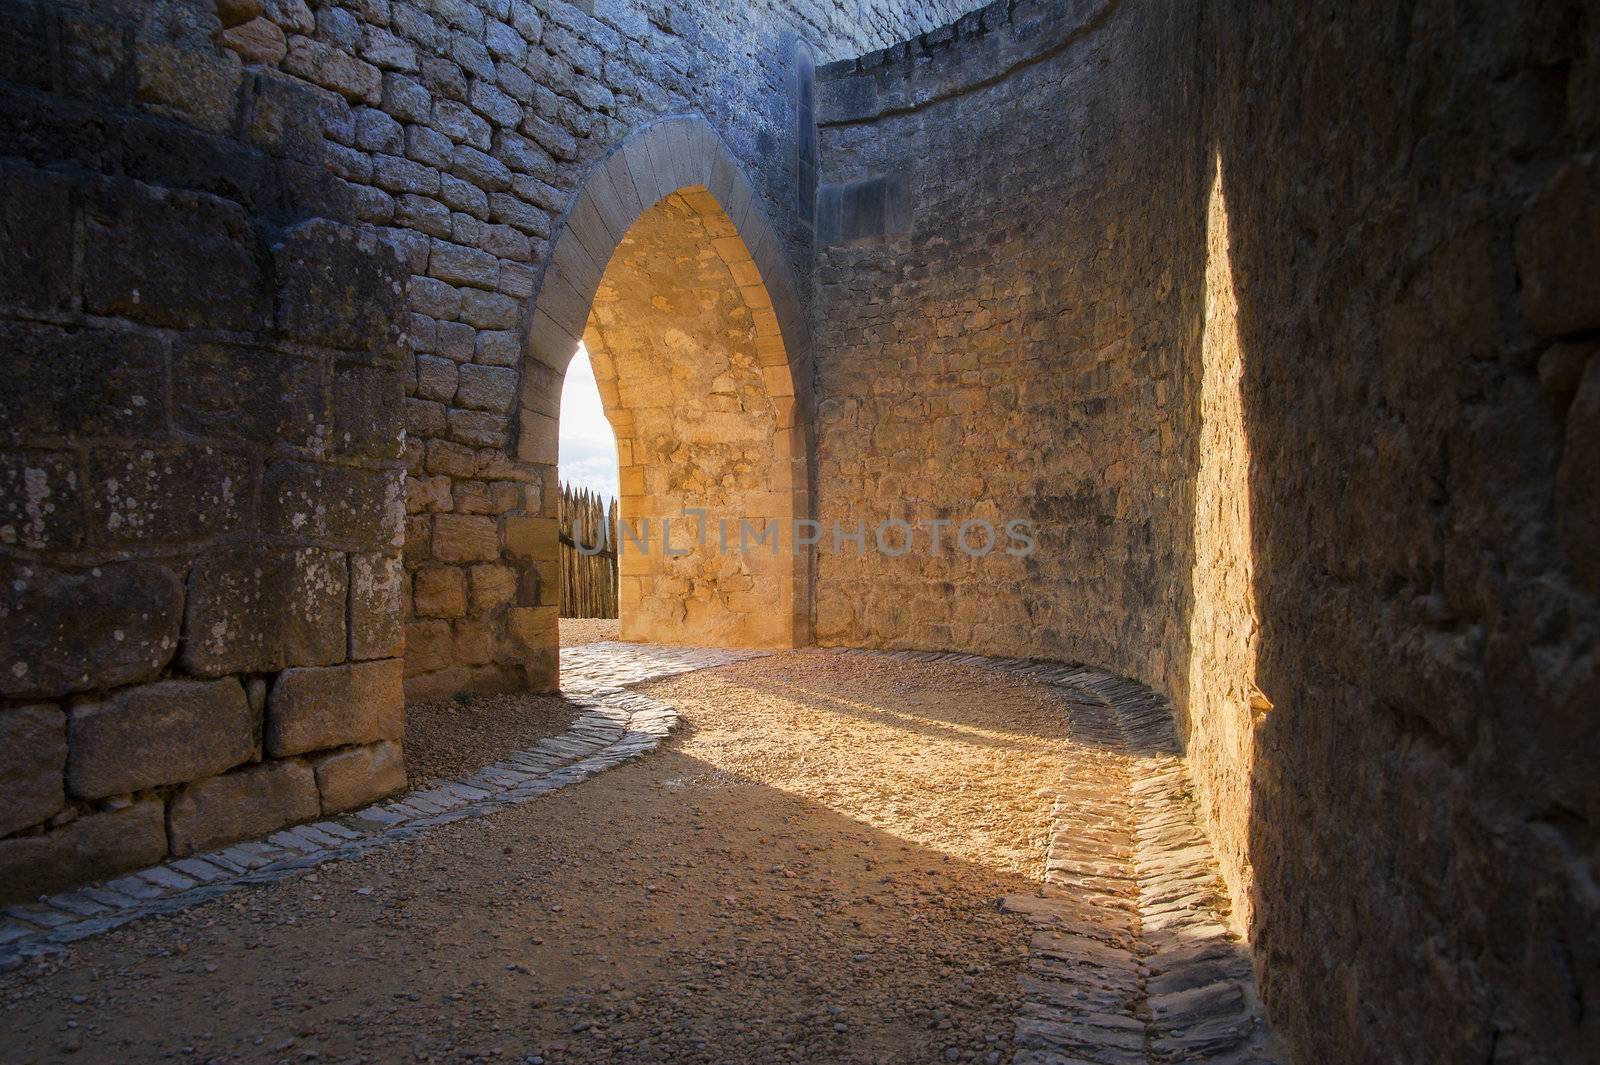 Medieval castle archway located in France